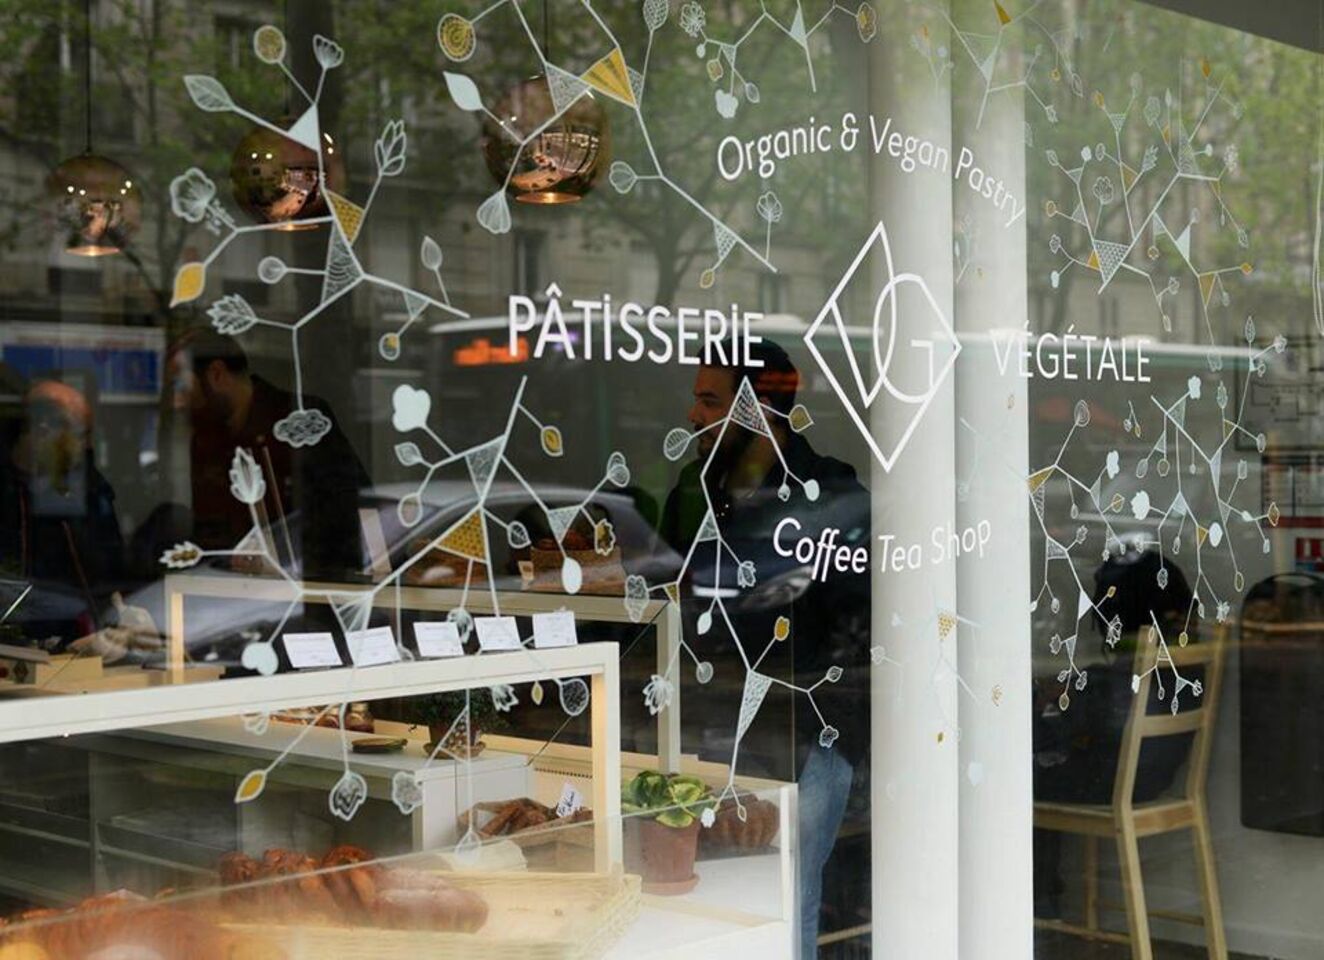 A photo of VG Pâtisserie